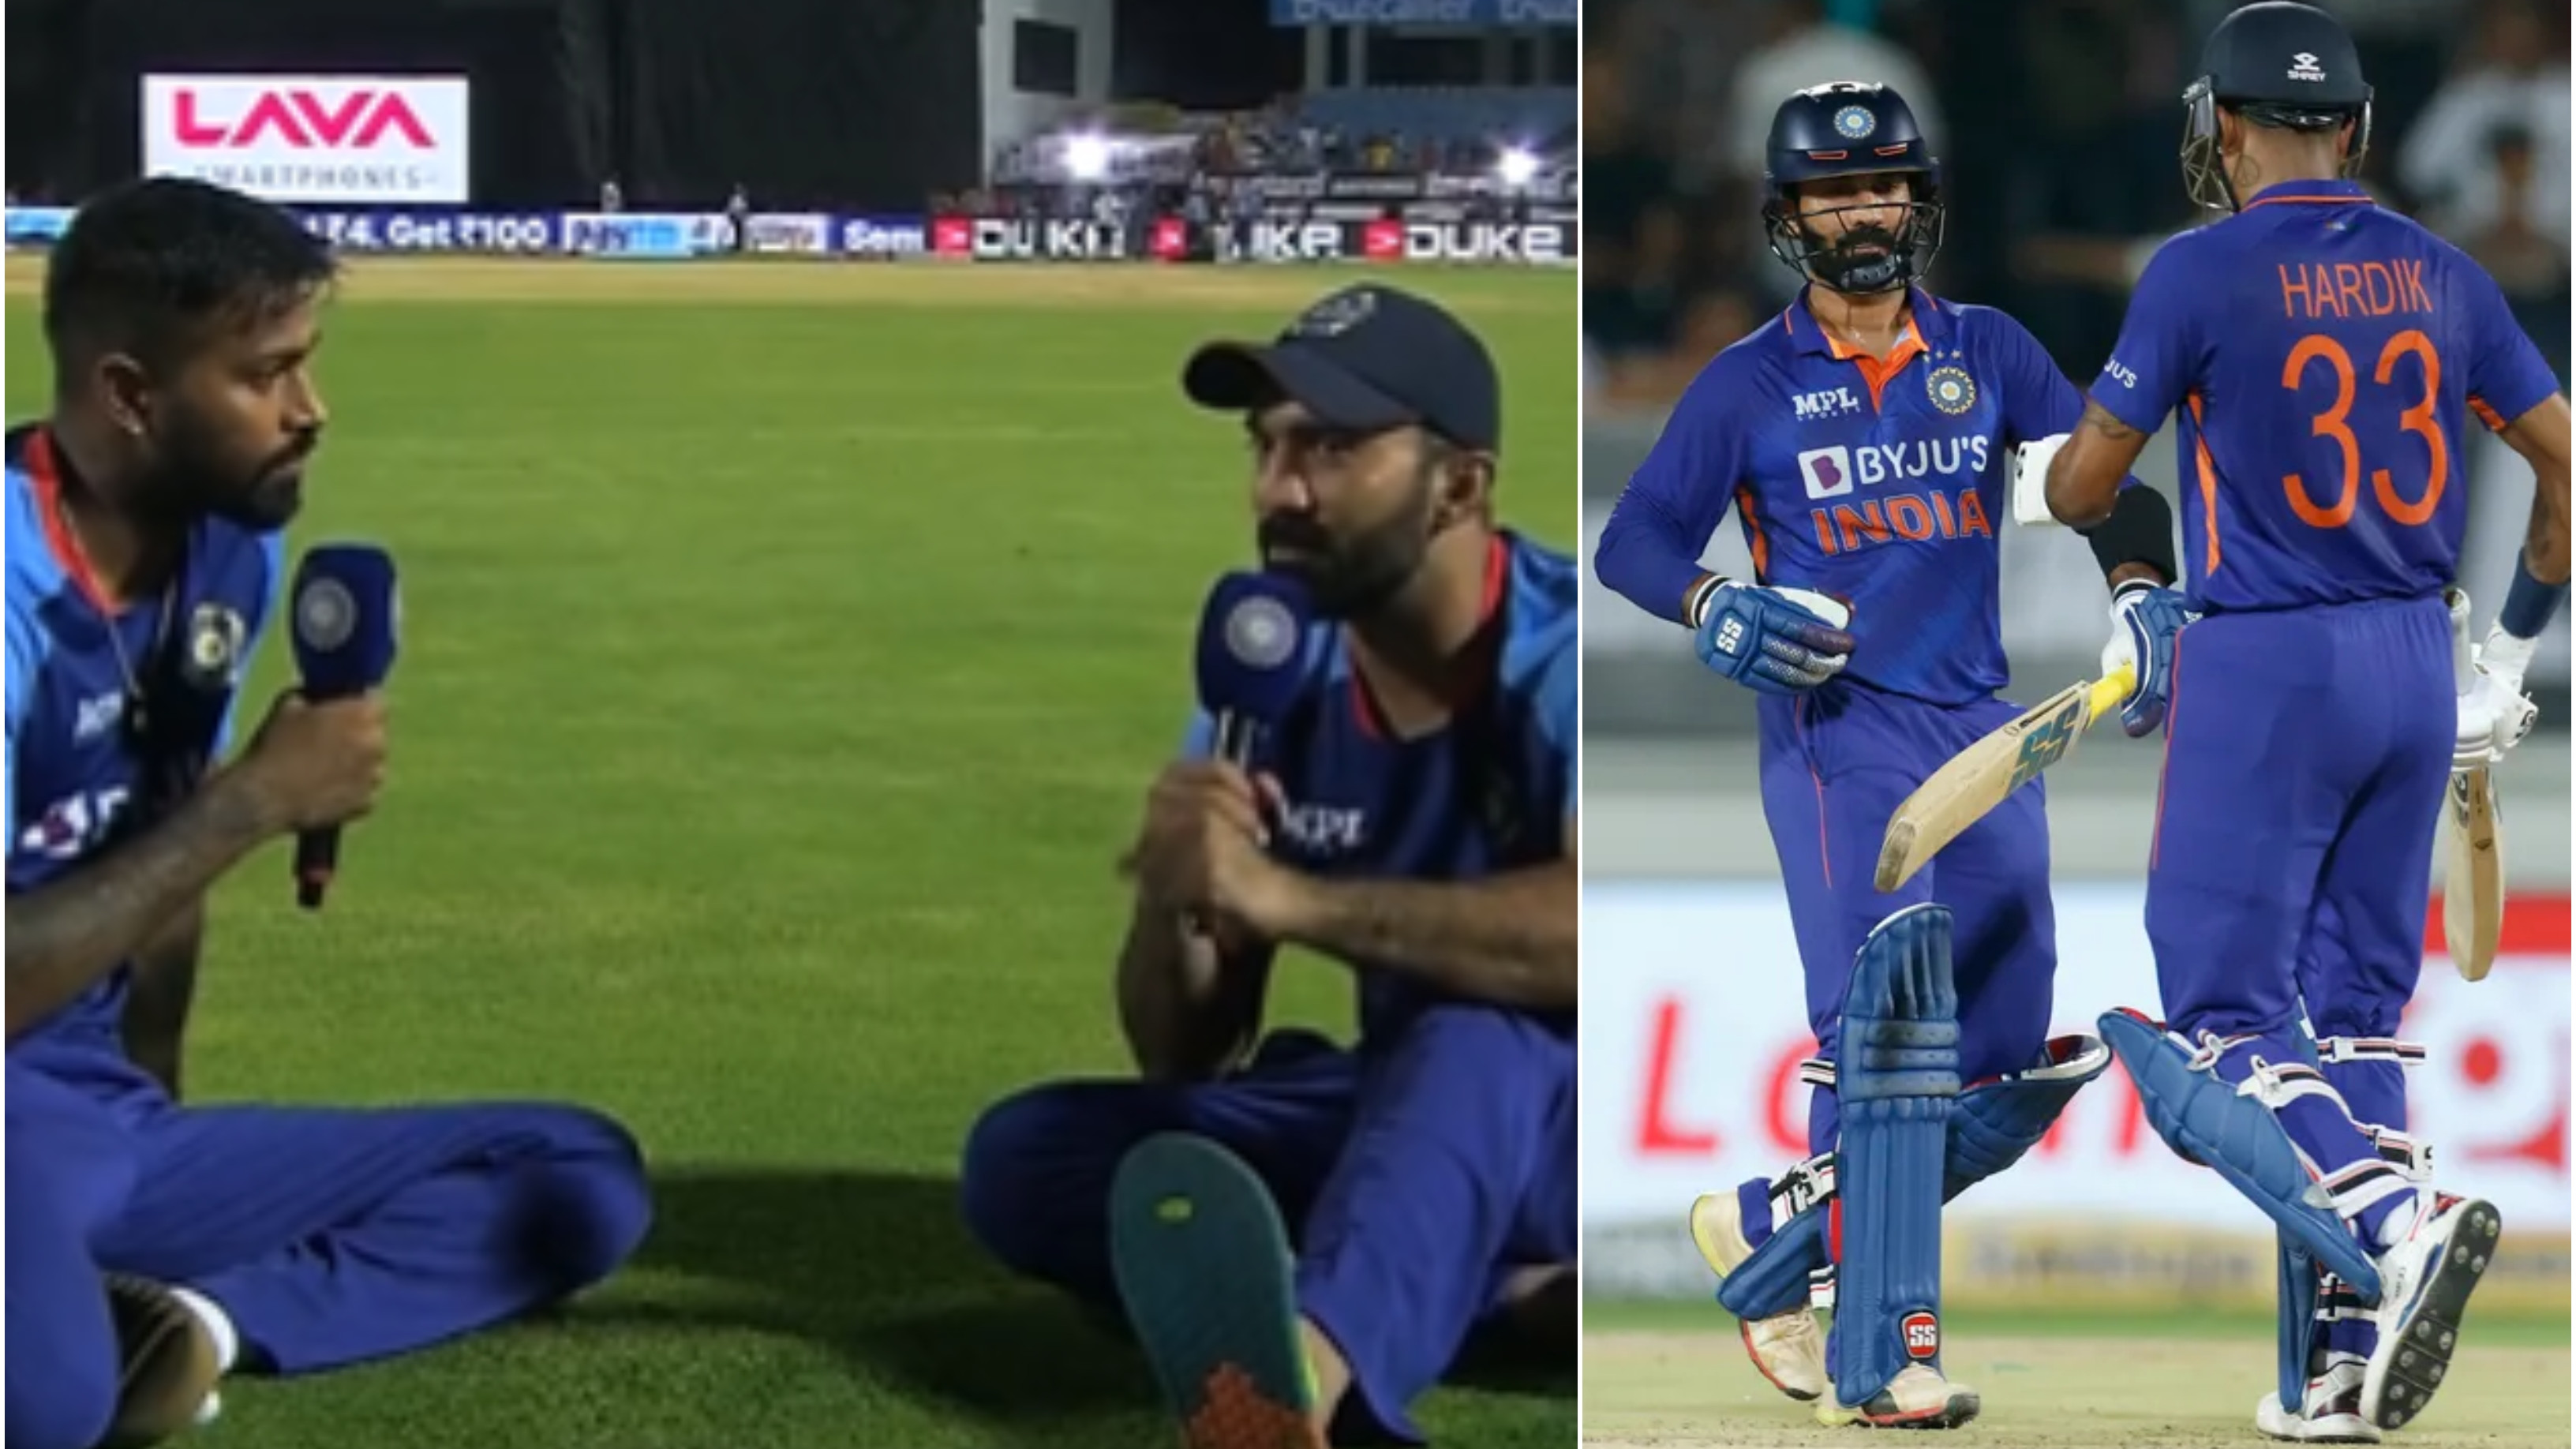 IND v SA 2022: WATCH – “Well done my brother, very proud of you”, Pandya hails Karthik as an inspiration